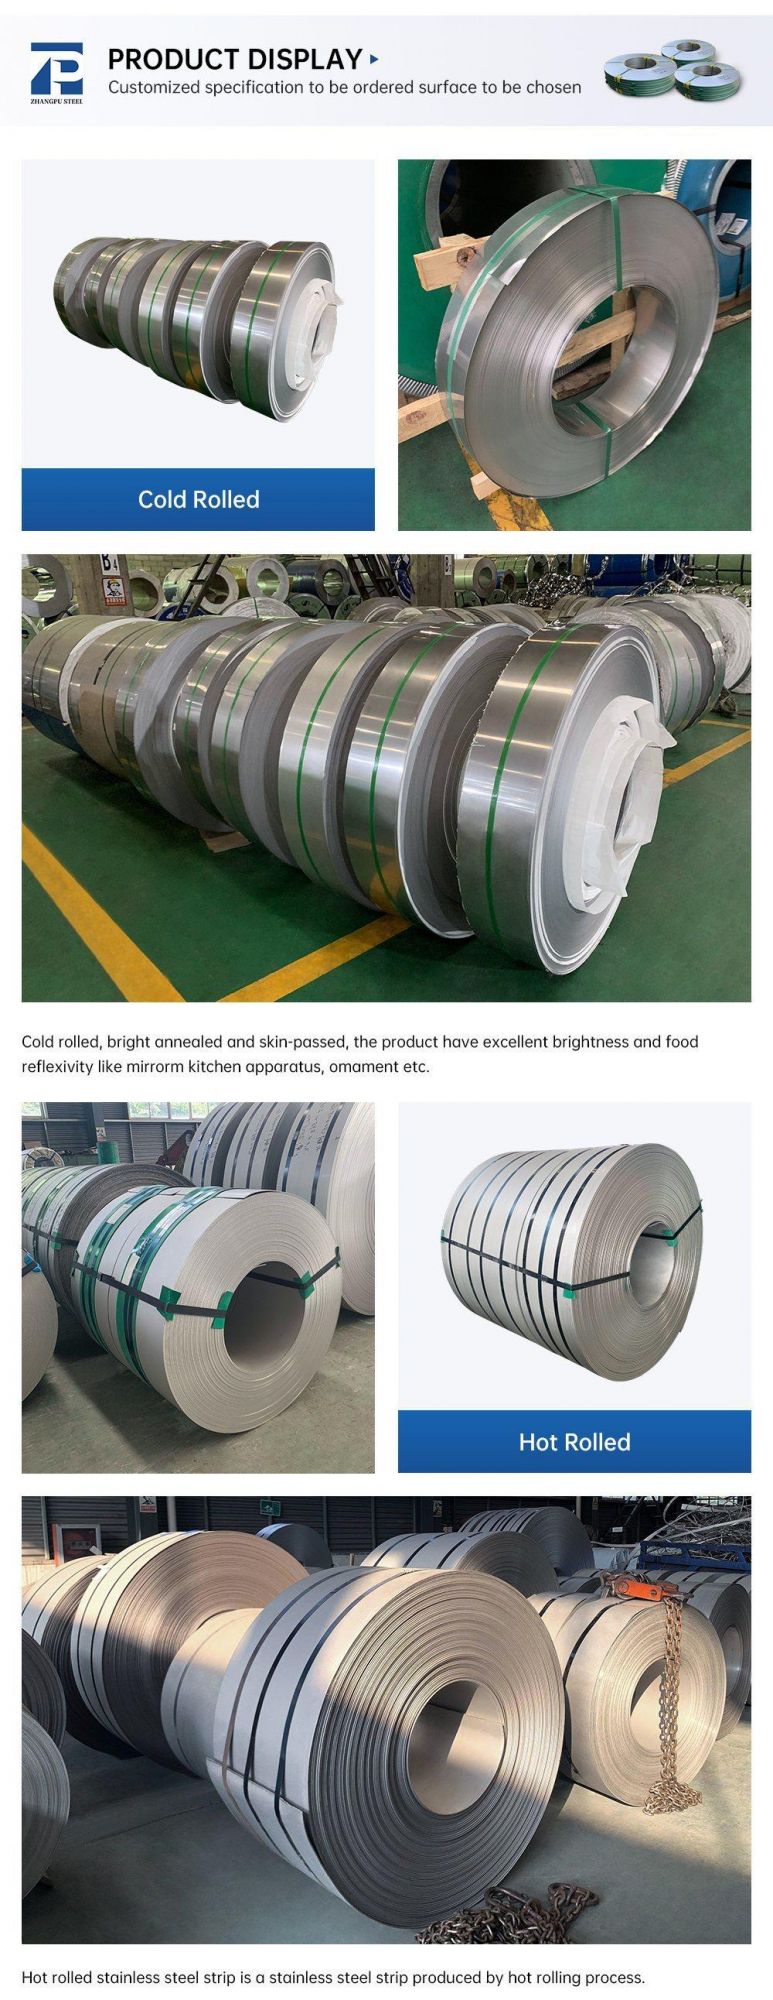 AISI ASTM DIN En GB JIS 202 316 410 409 304 Cold Rolled Stainless Steel Coil